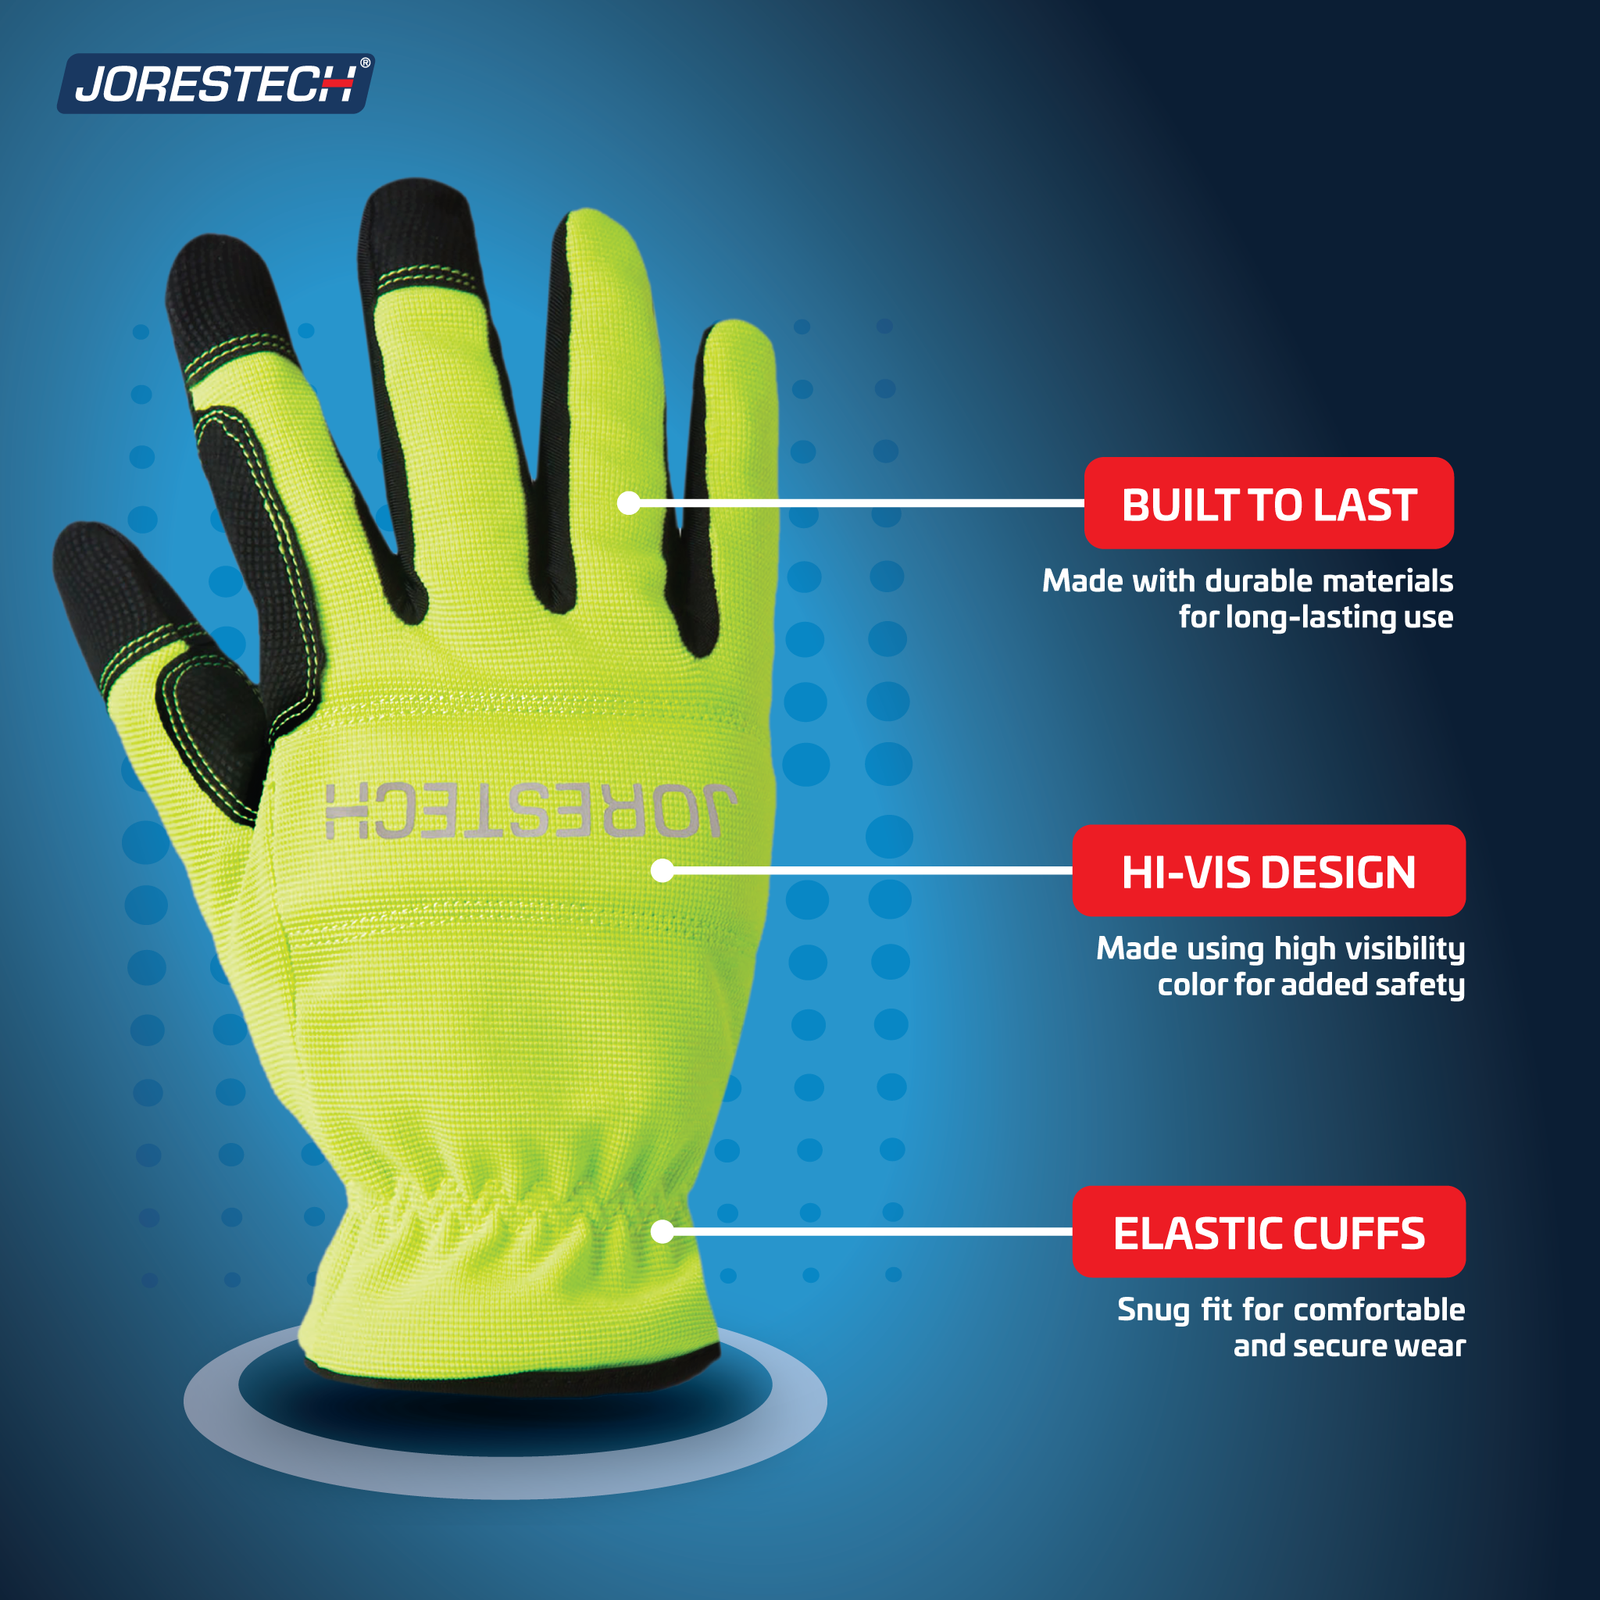 Hi vis safety gloves built with durable materials, hi vis design to increase visibility and elastic cuff for a more secure grip